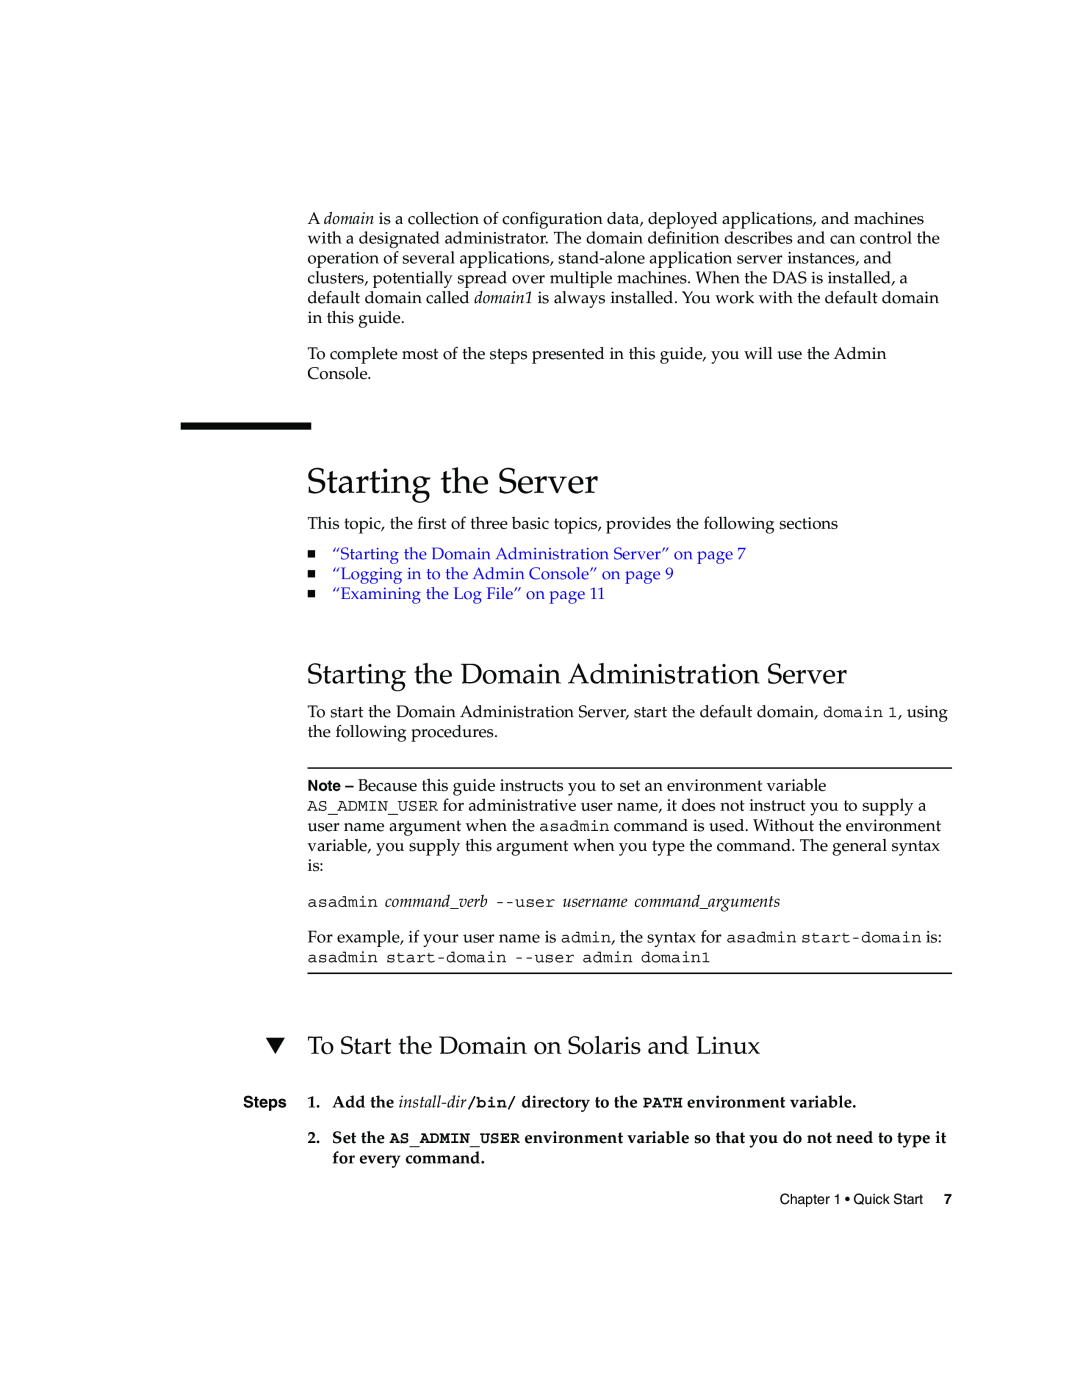 Sun Microsystems 2005Q2 Starting the Server, Starting the Domain Administration Server, “Examining the Log File” on page 